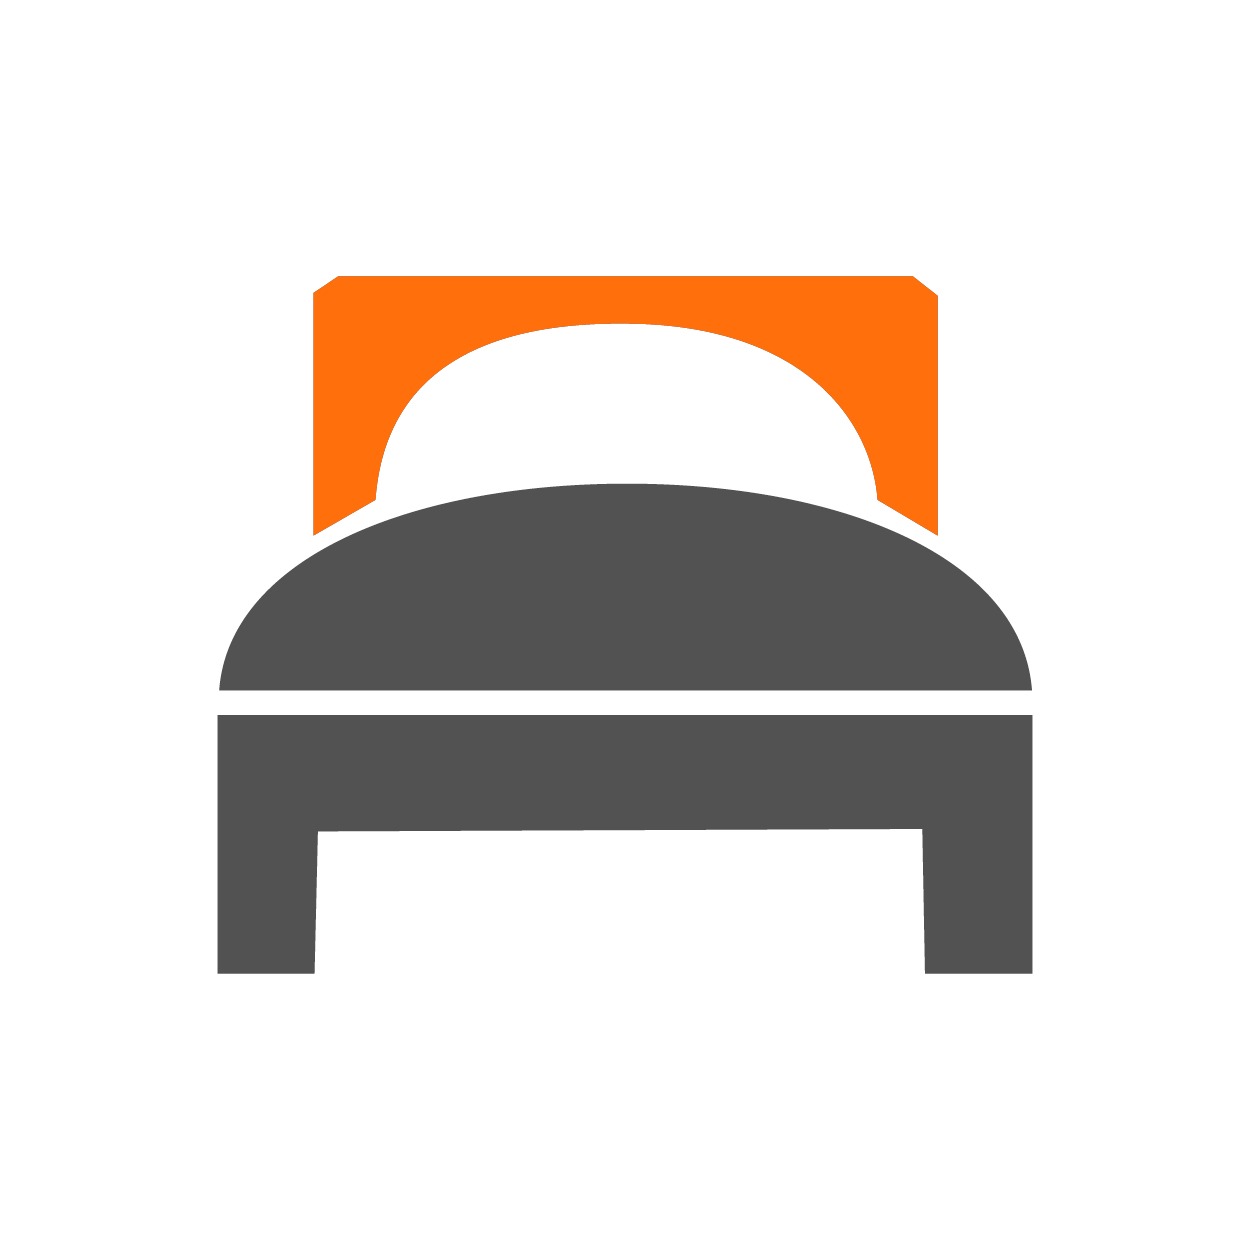 Bed graphic, created by Mister Pixel from the Noun Project